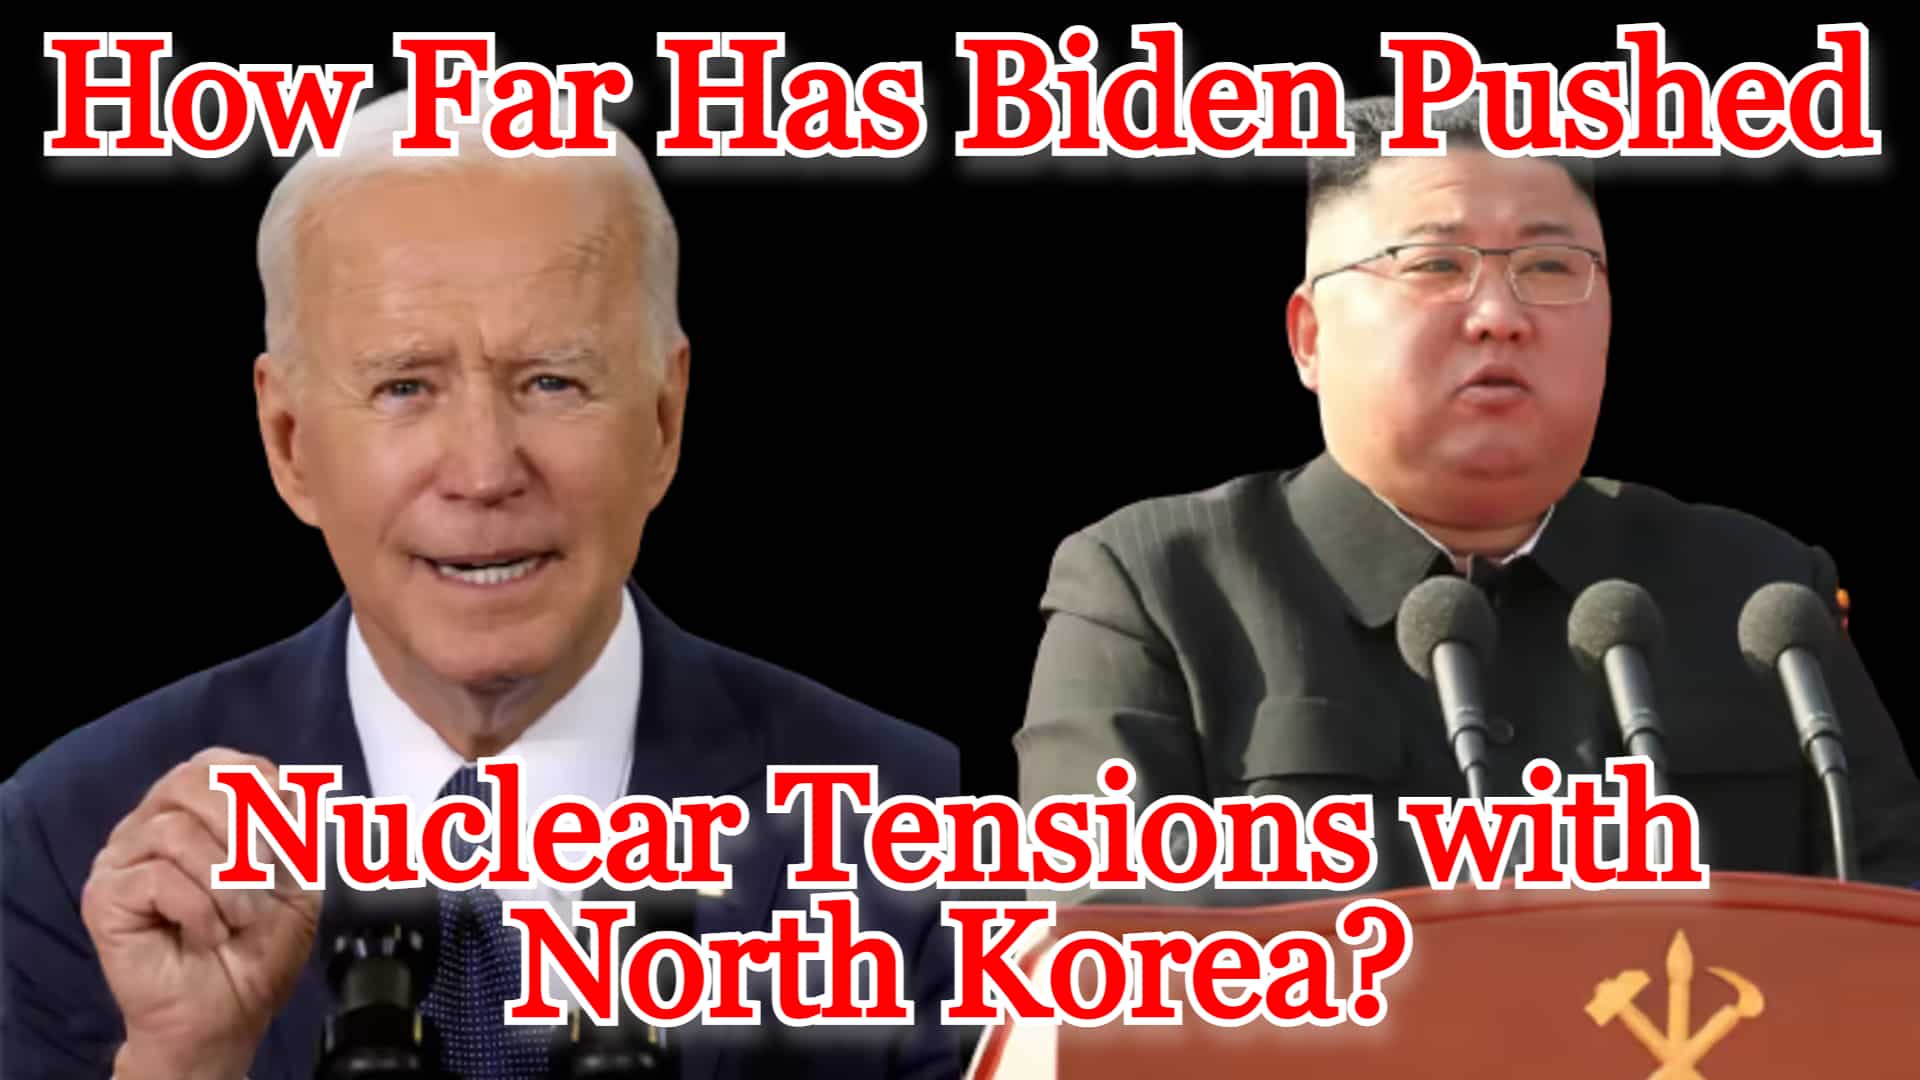 COI #478: How Far Has Biden Pushed Nuclear Tensions with North Korea?